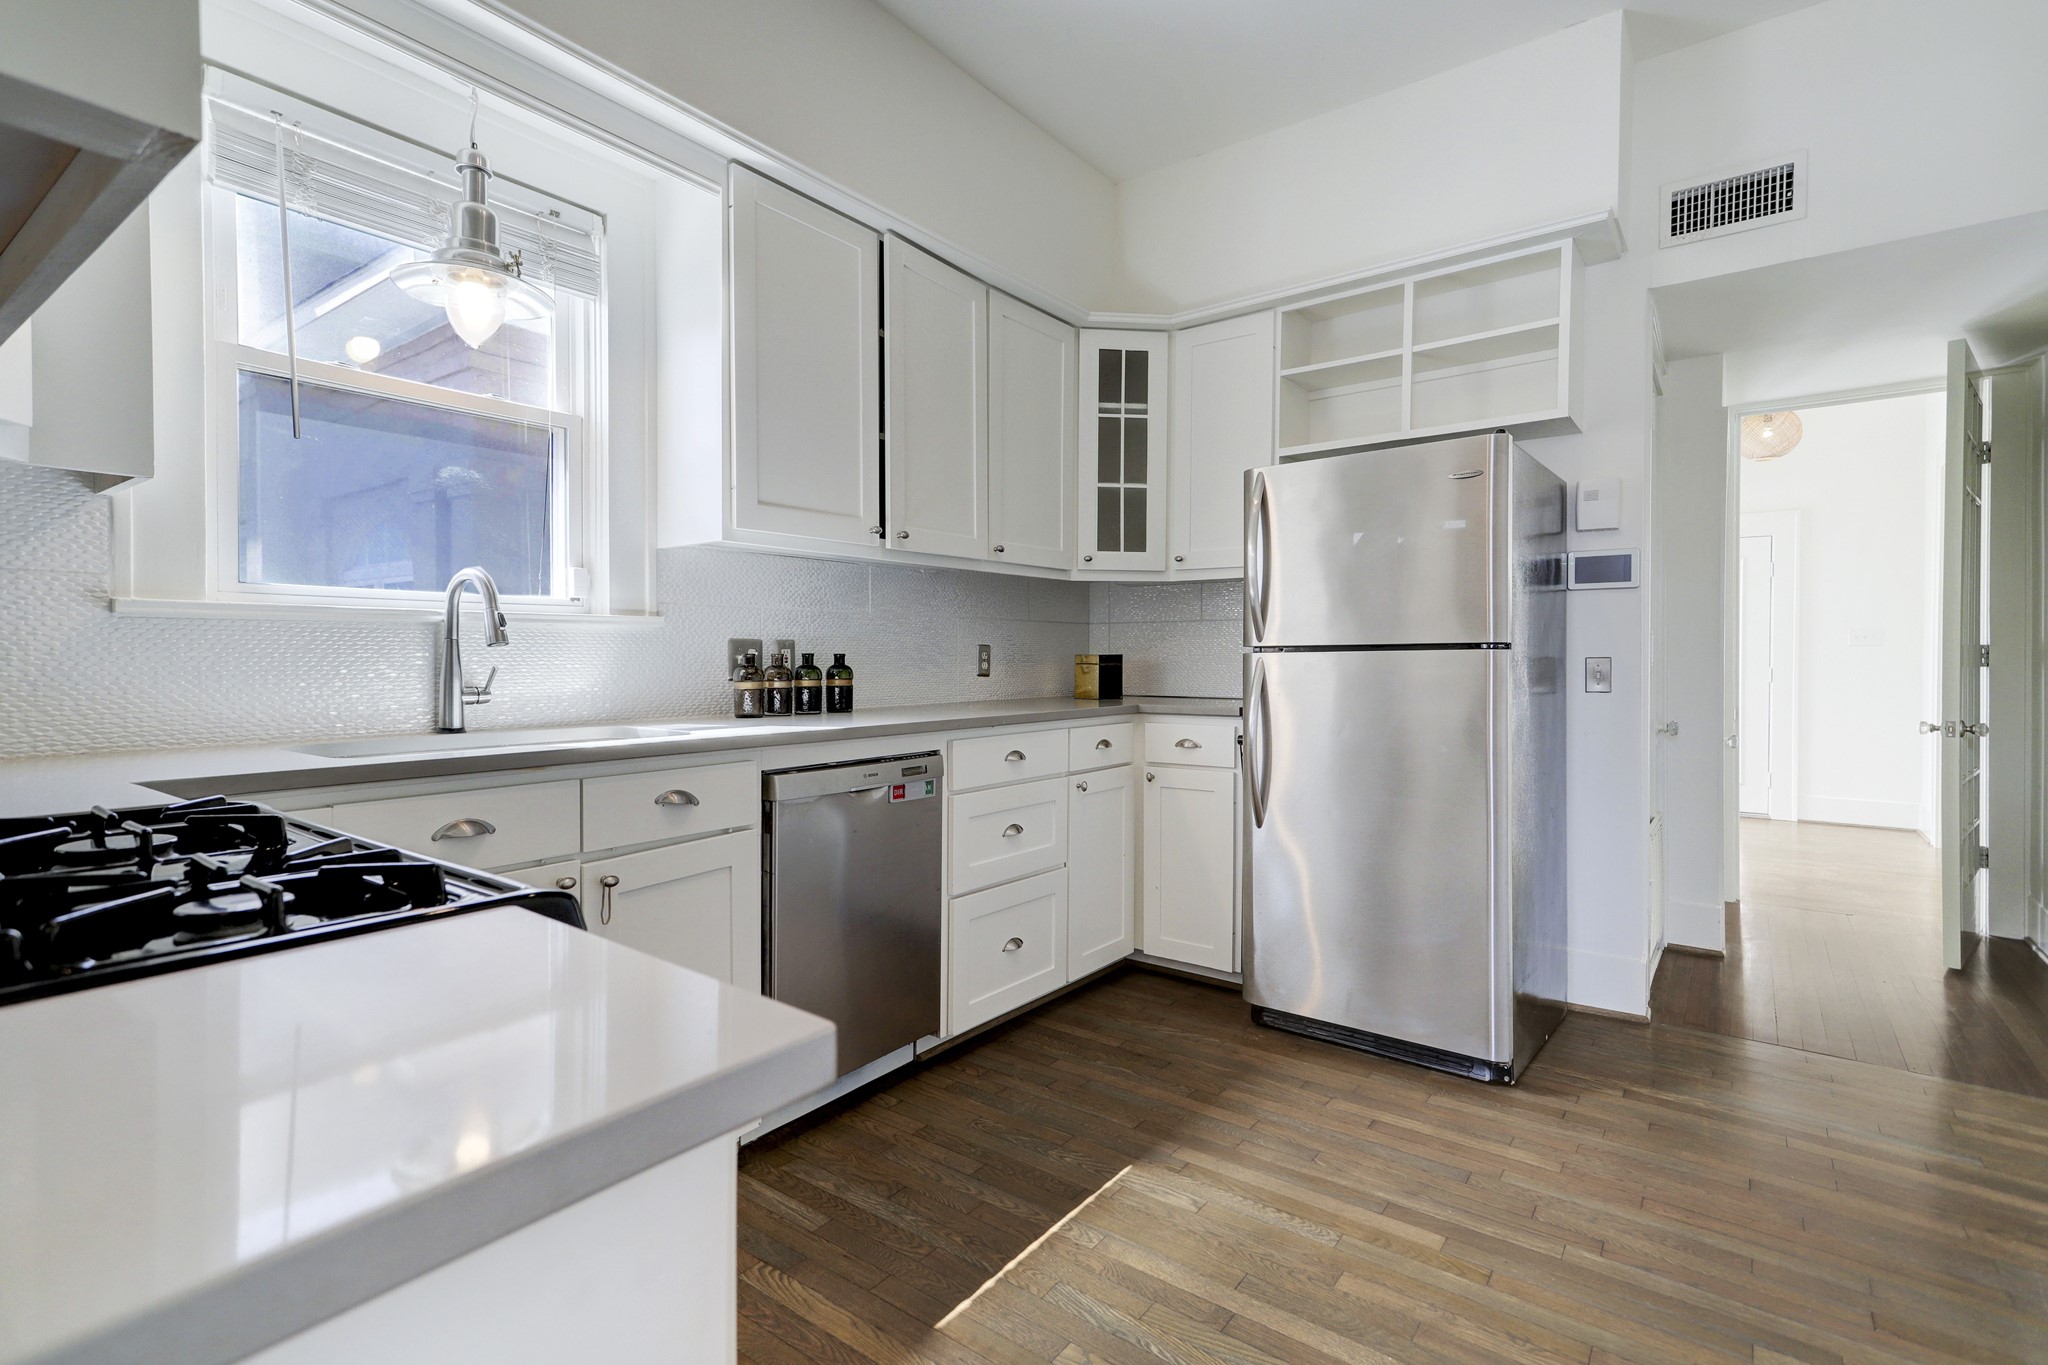 WITH PLENTY OF CABINET SPACE, GRANITE COUNTERTOPS AND CUSTOM BACKSPLASH, THIS KITCHEN HAS BEEN EQUIPPED WITH A BEAUTIFUL STAINLESS APPLIANCE PACKAGE!